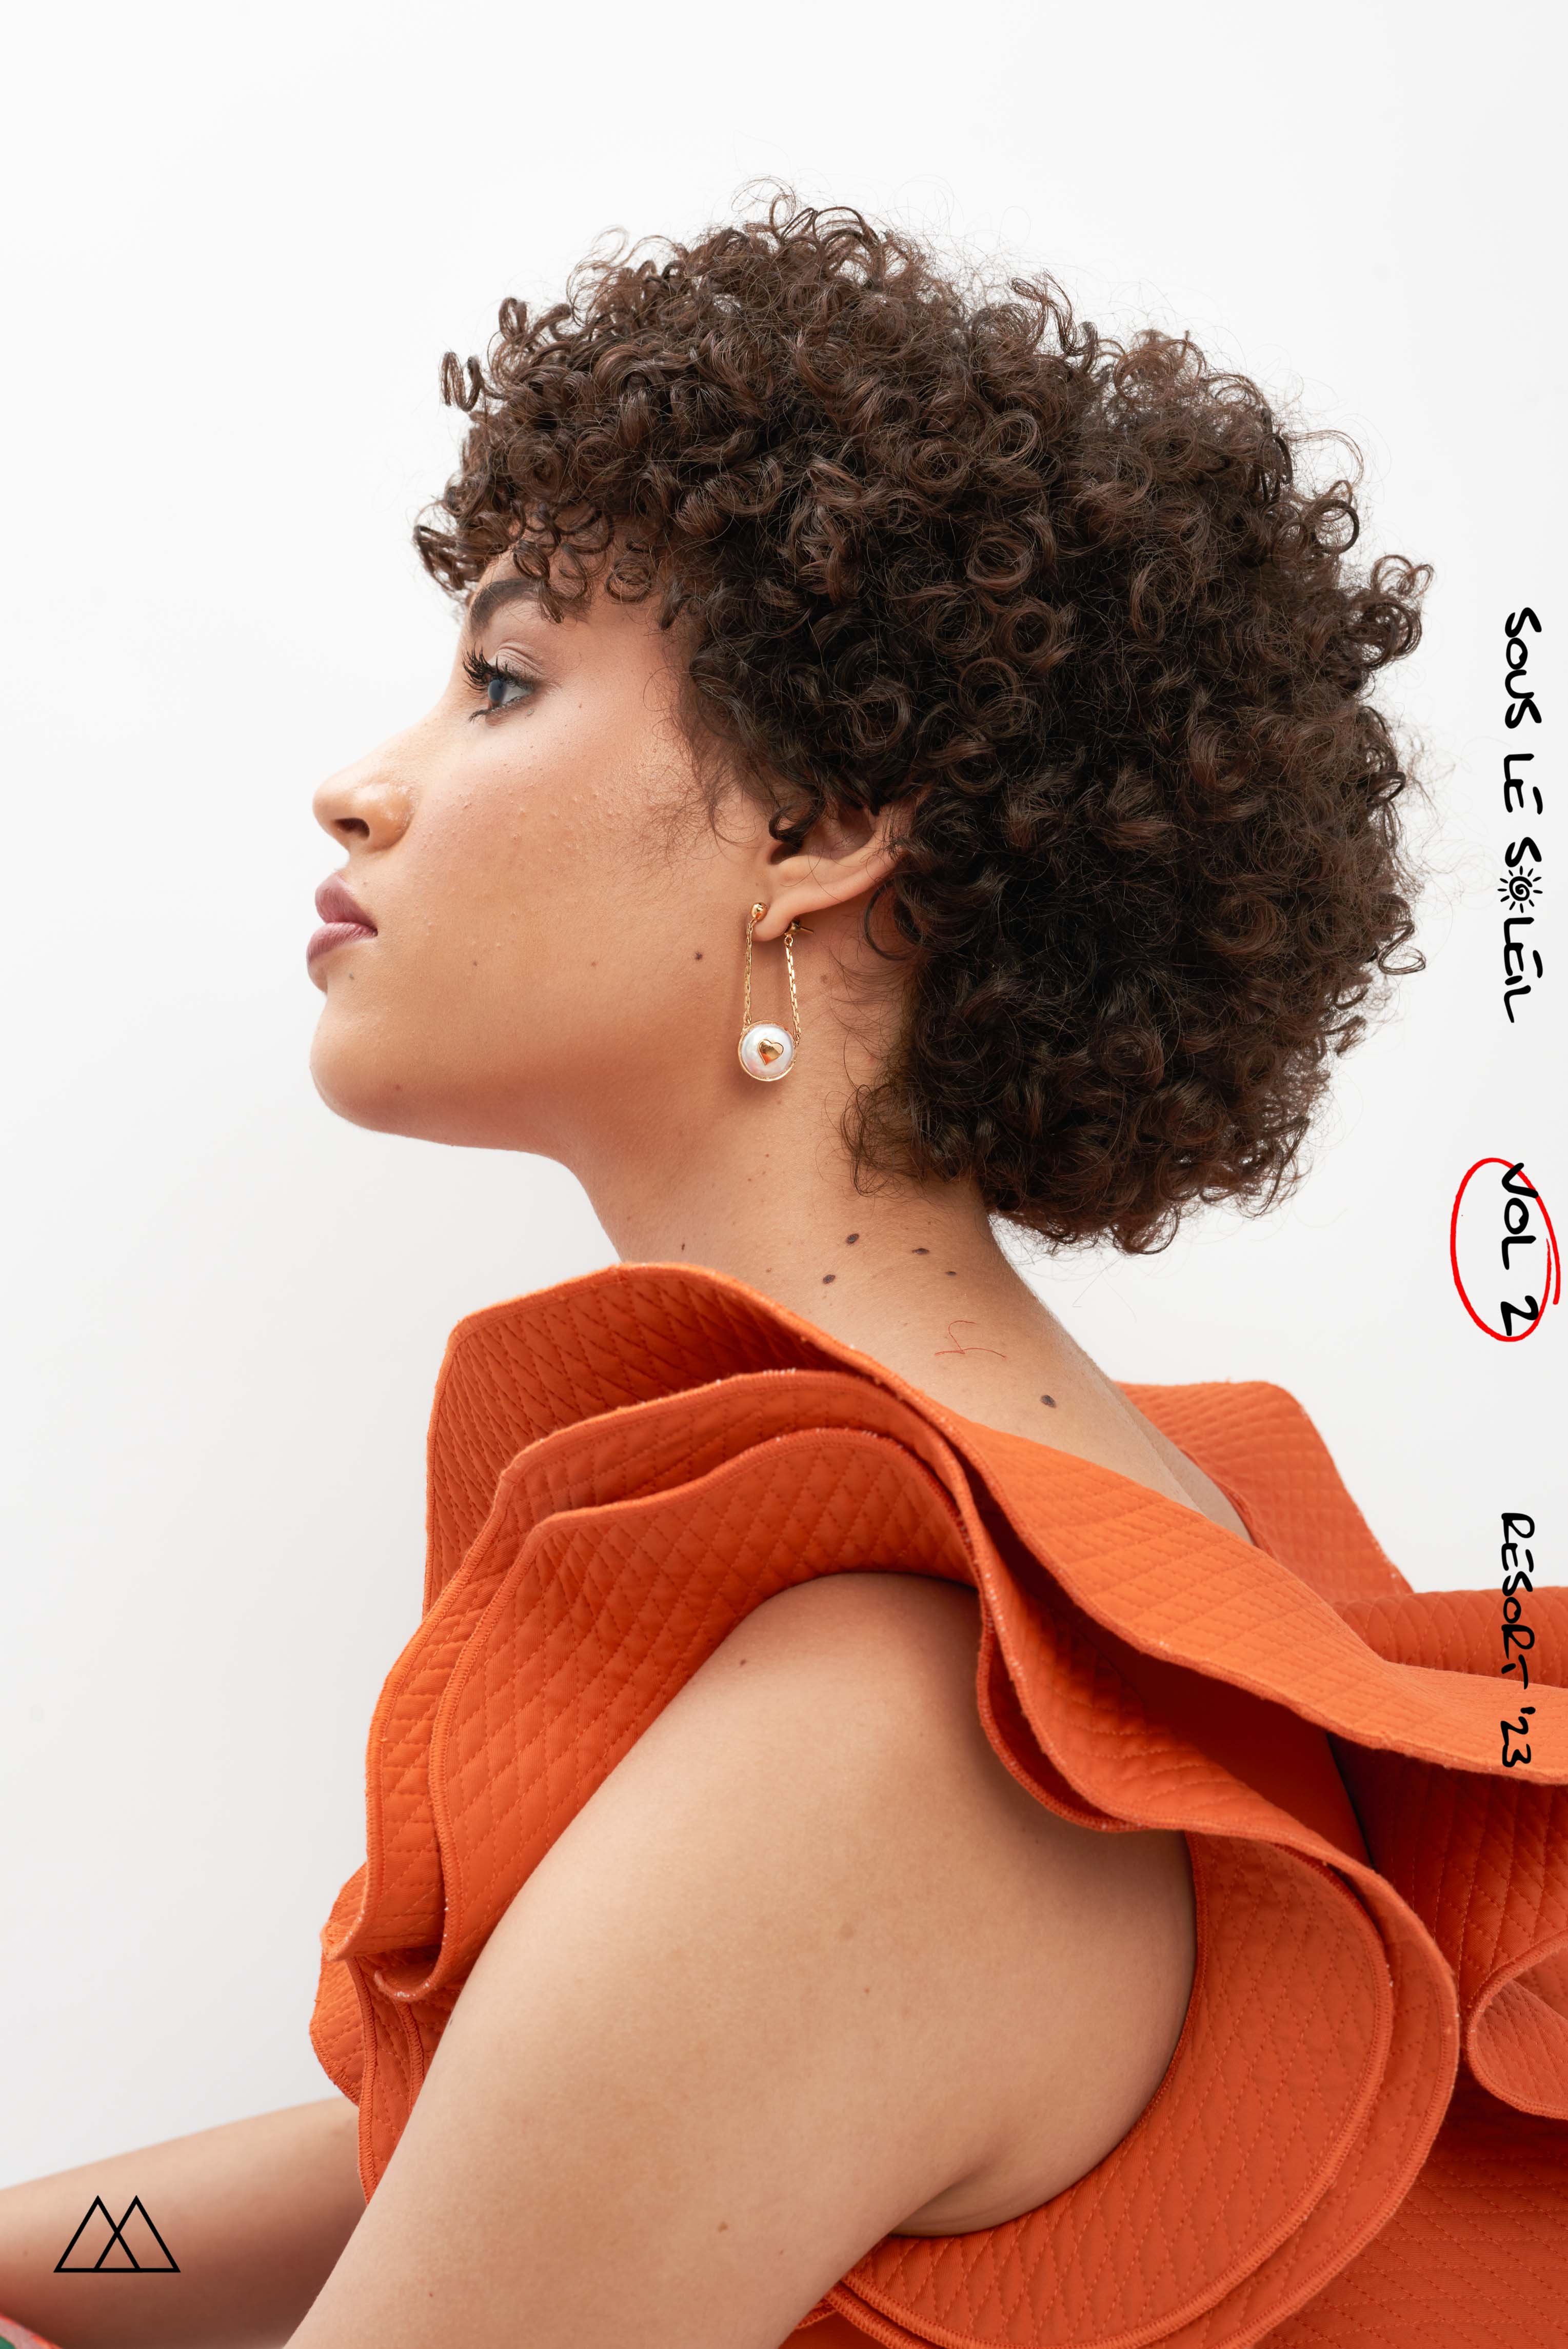 Amama,Better Together Earrings